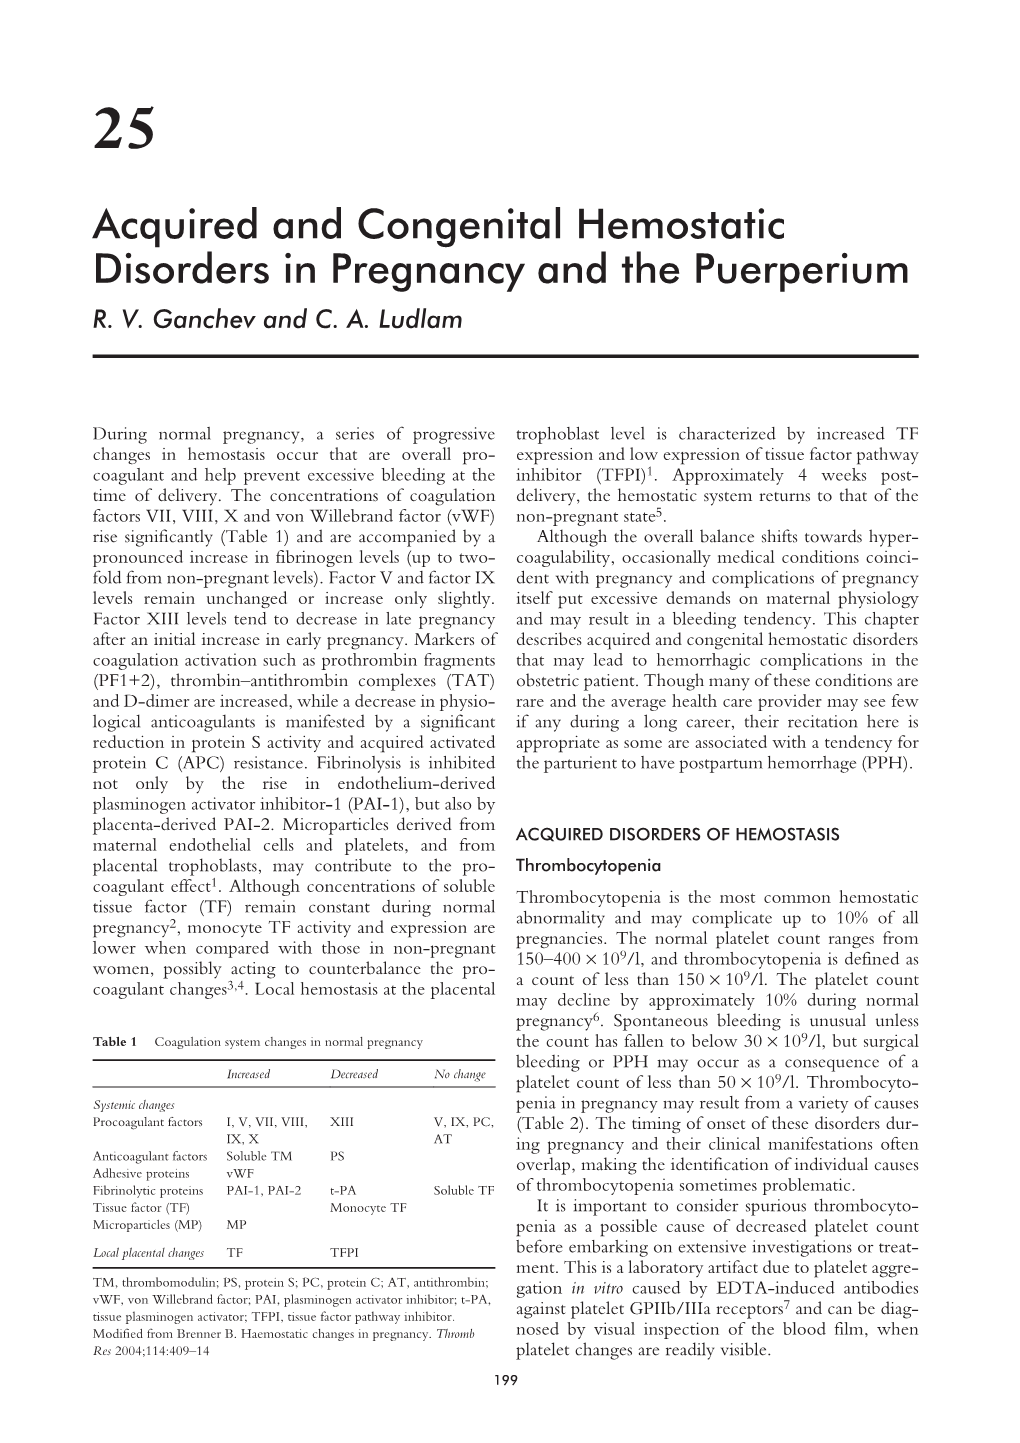 Acquired and Congenital Hemostatic Disorders in Pregnancy and the Puerperium R